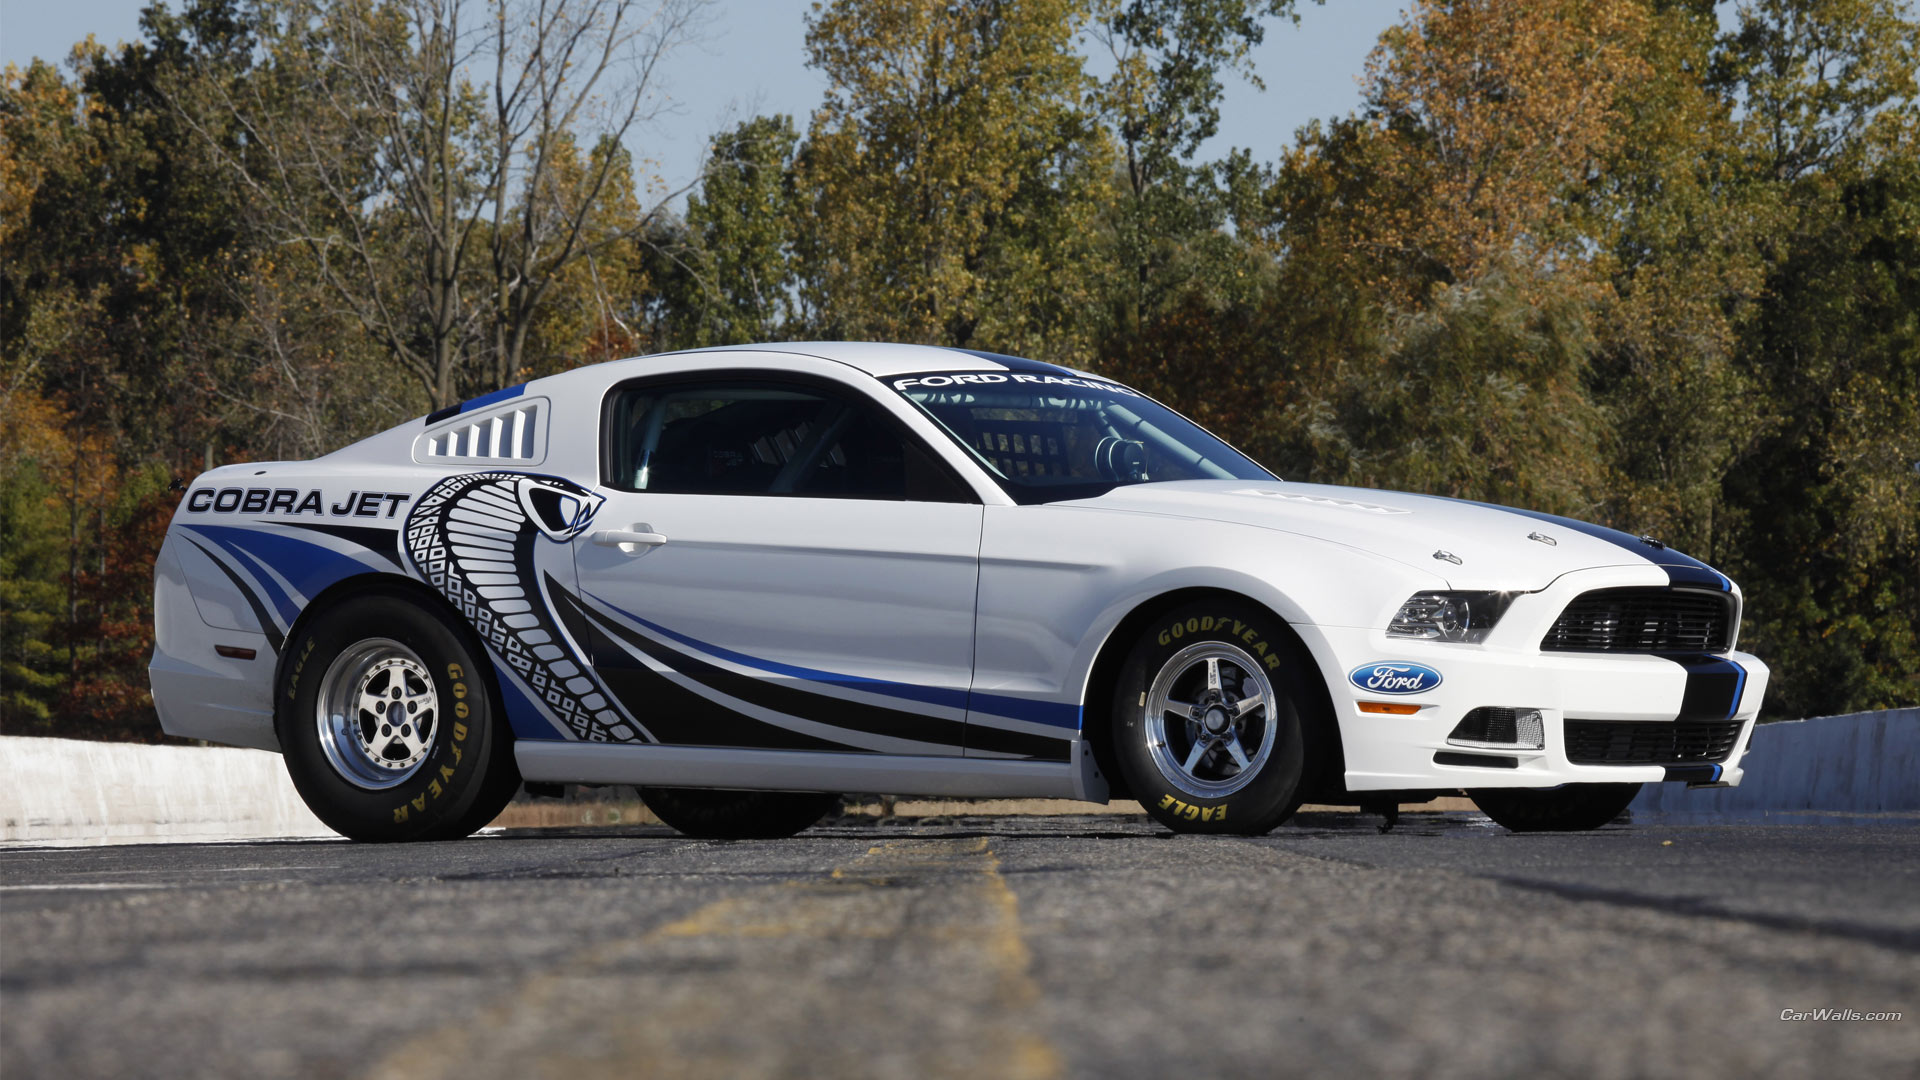 vehicles, ford mustang cobra jet twin turbo